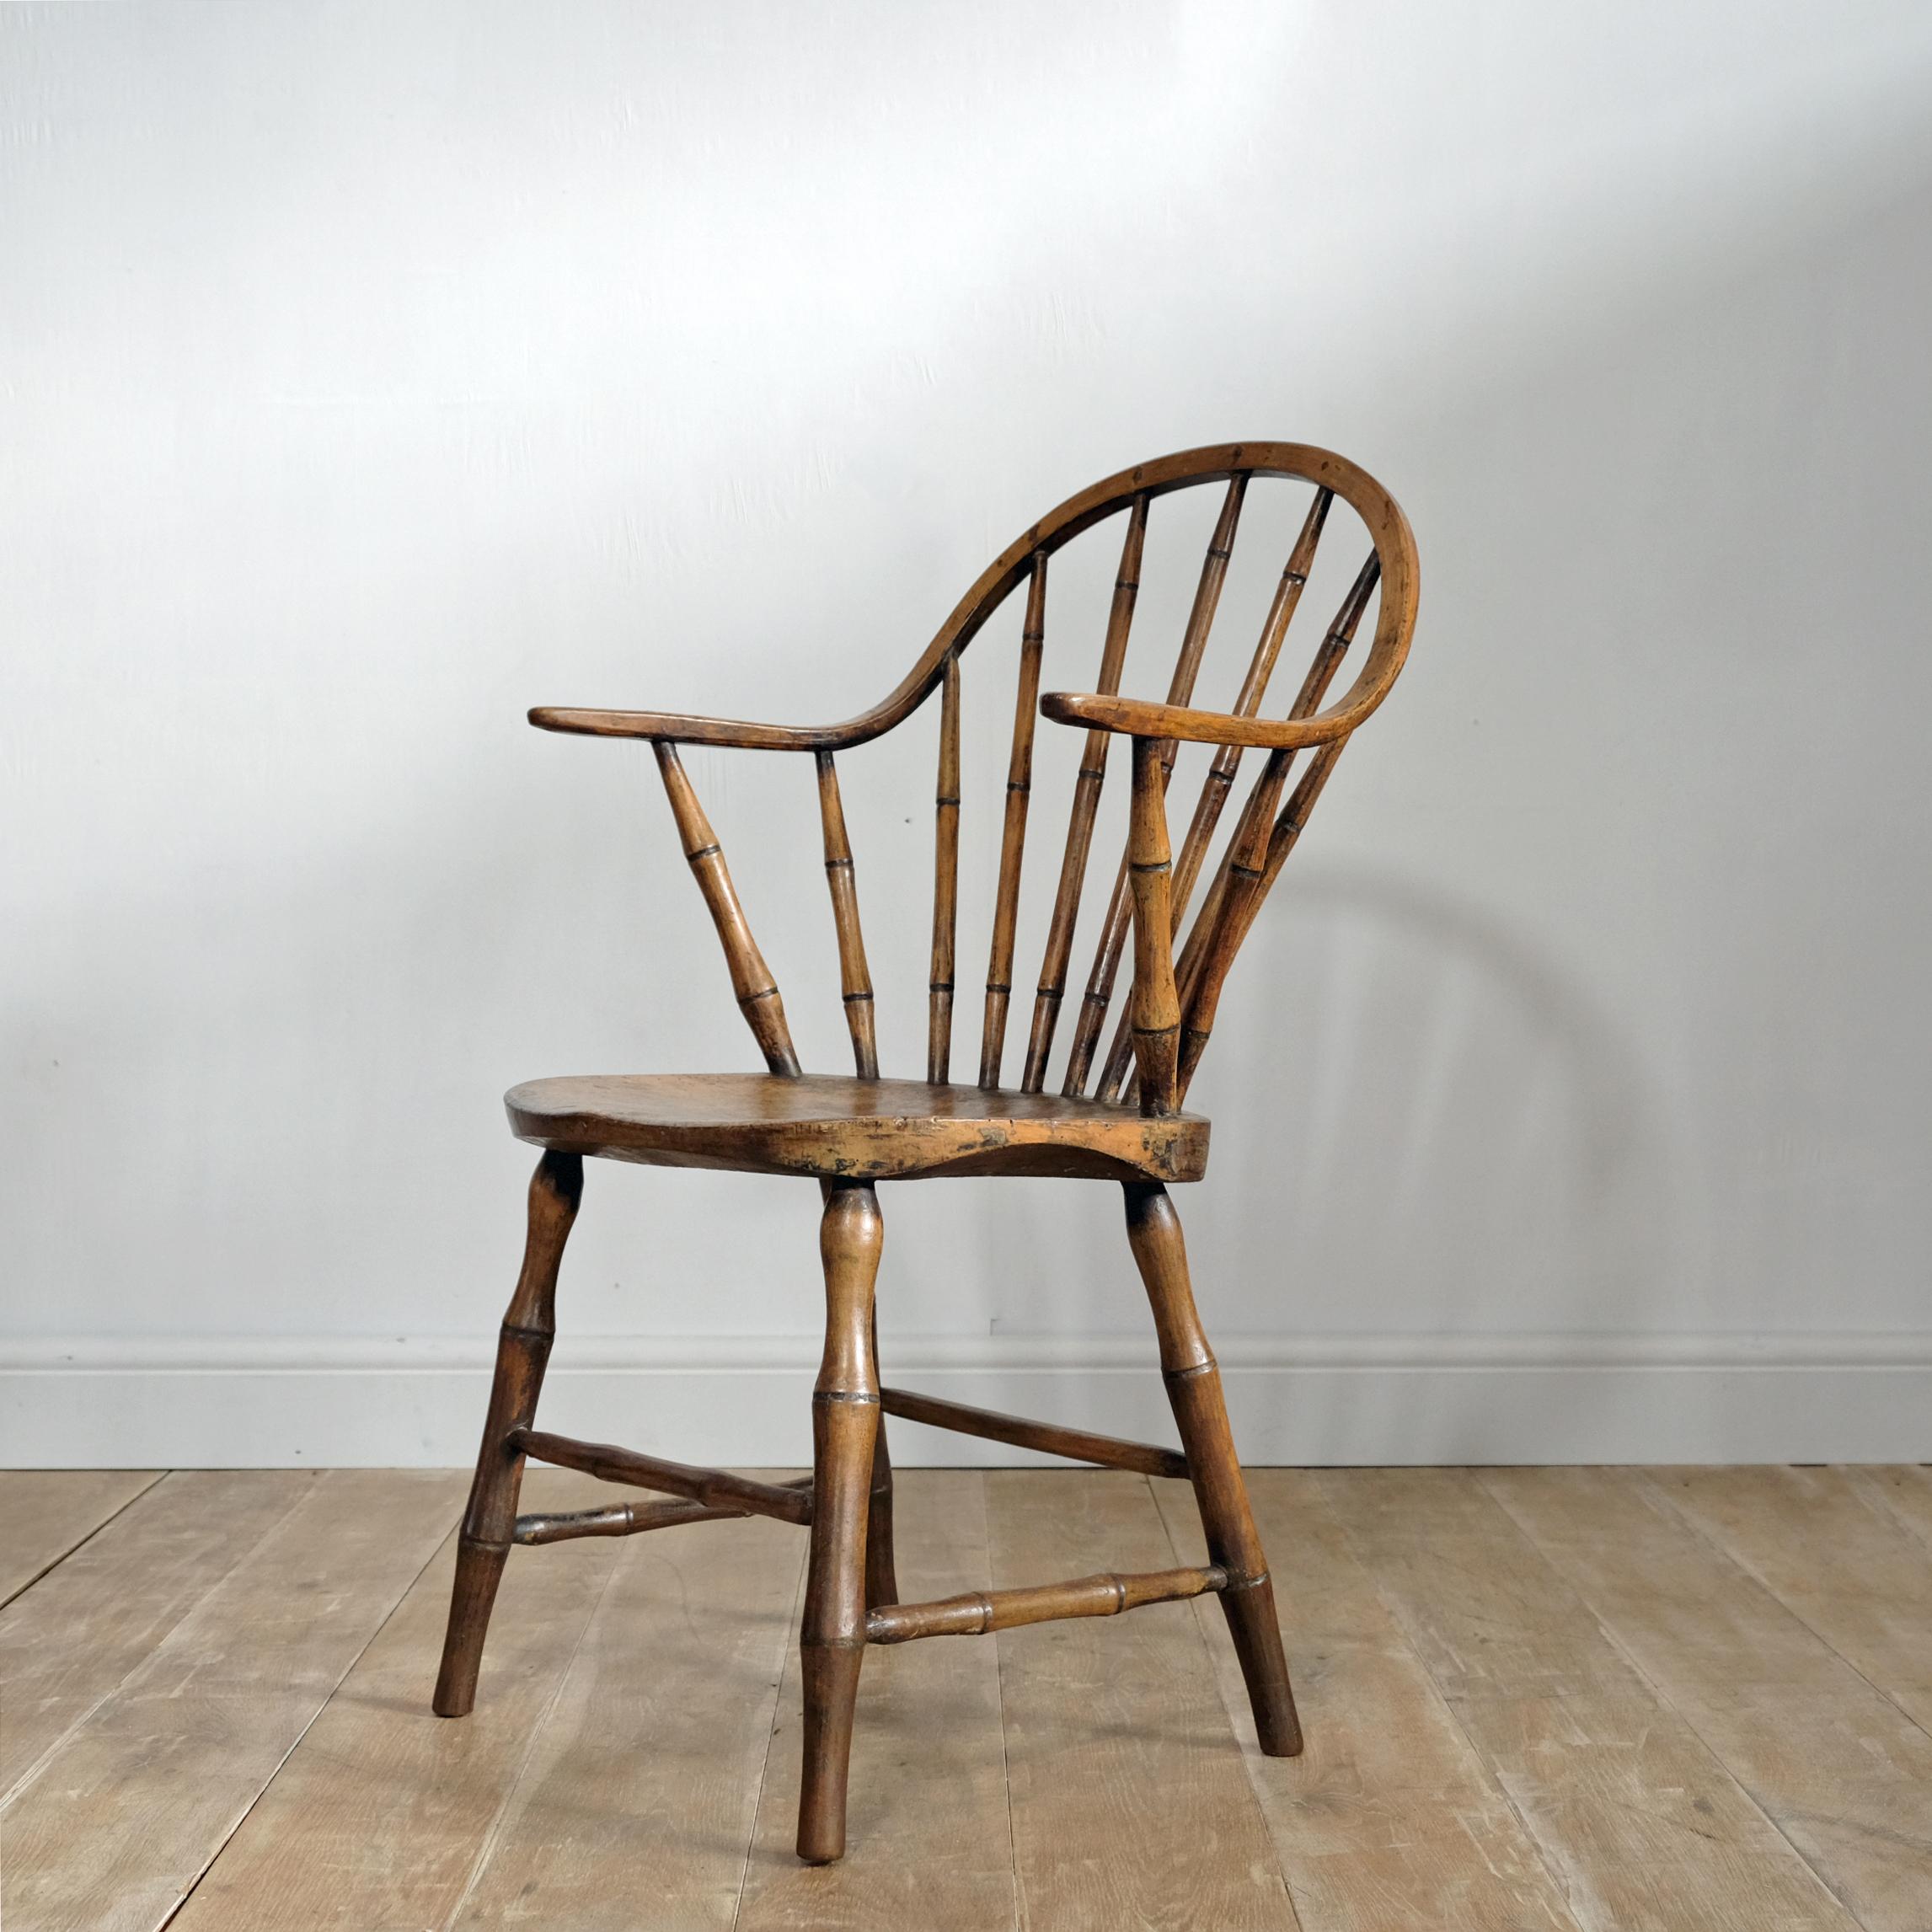 Known as ‘continuous arm’ Windsor chairs, chairs such as this one originate in the small Devon village of Yealmpton (only a few miles from our base). The unusual design then found its way to America in the early 19th century, inhabitants from